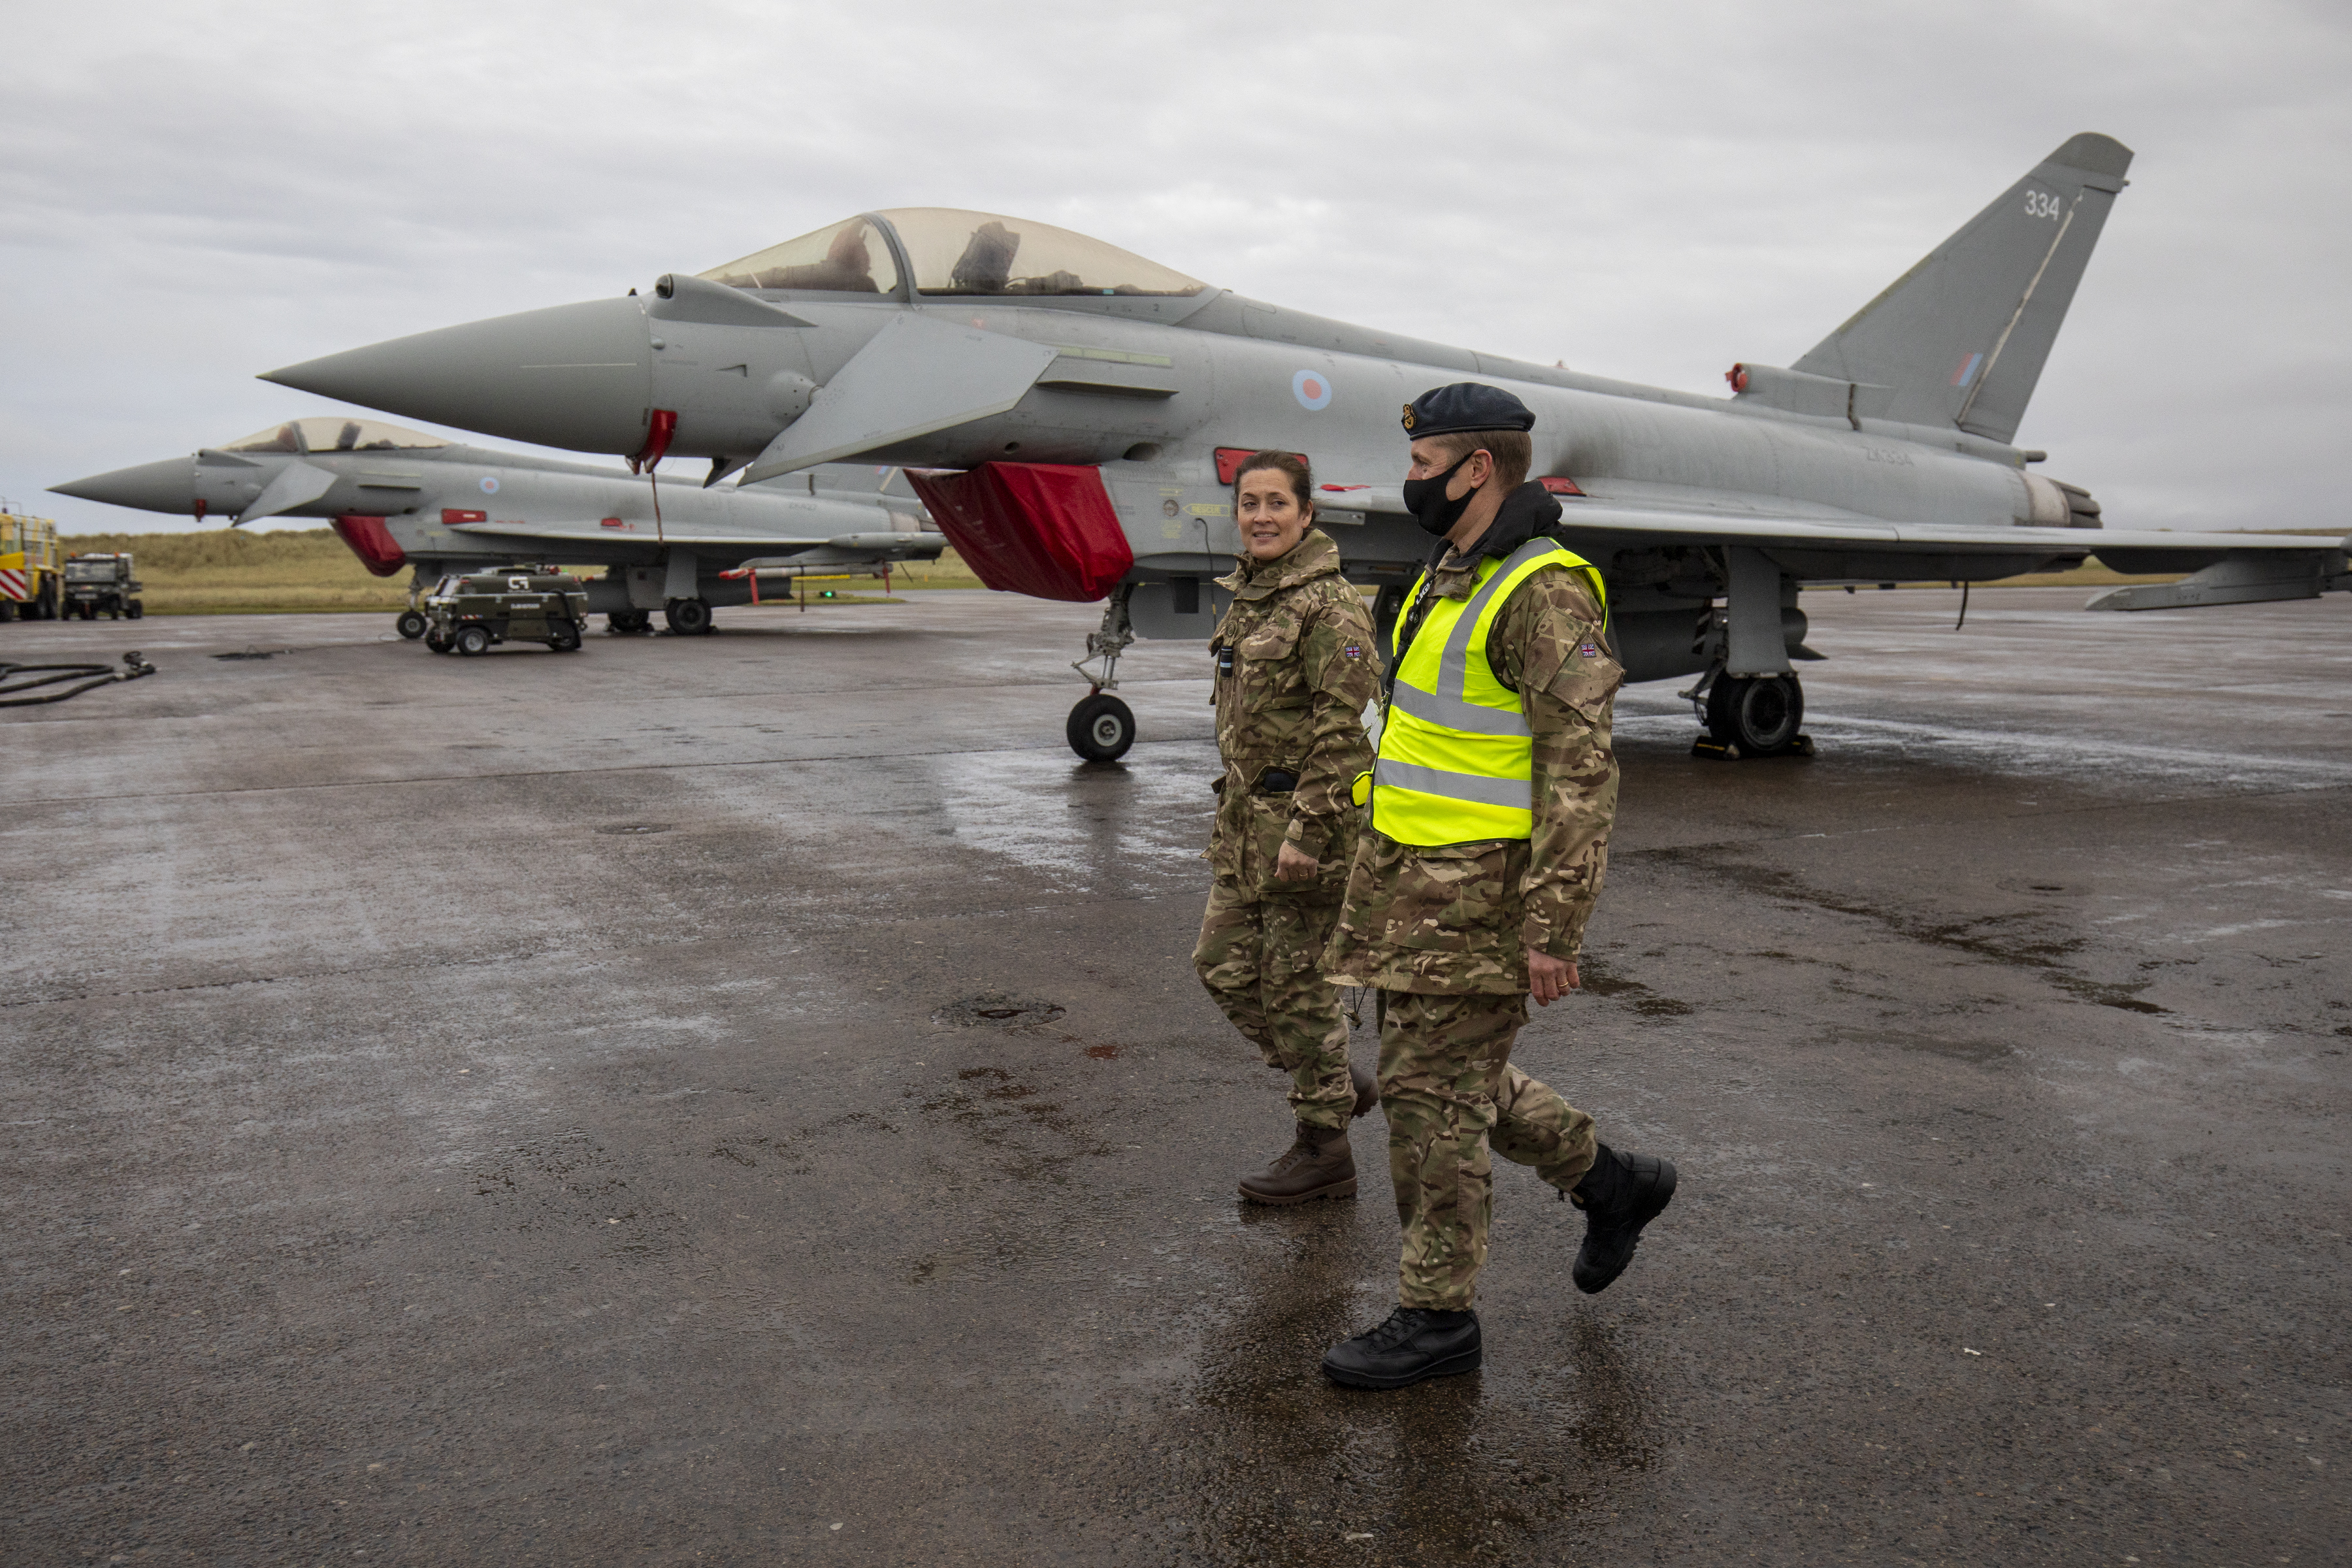 Air Vice Marshal Suraya Marshall walks with personnel, in-front of Typhoon.